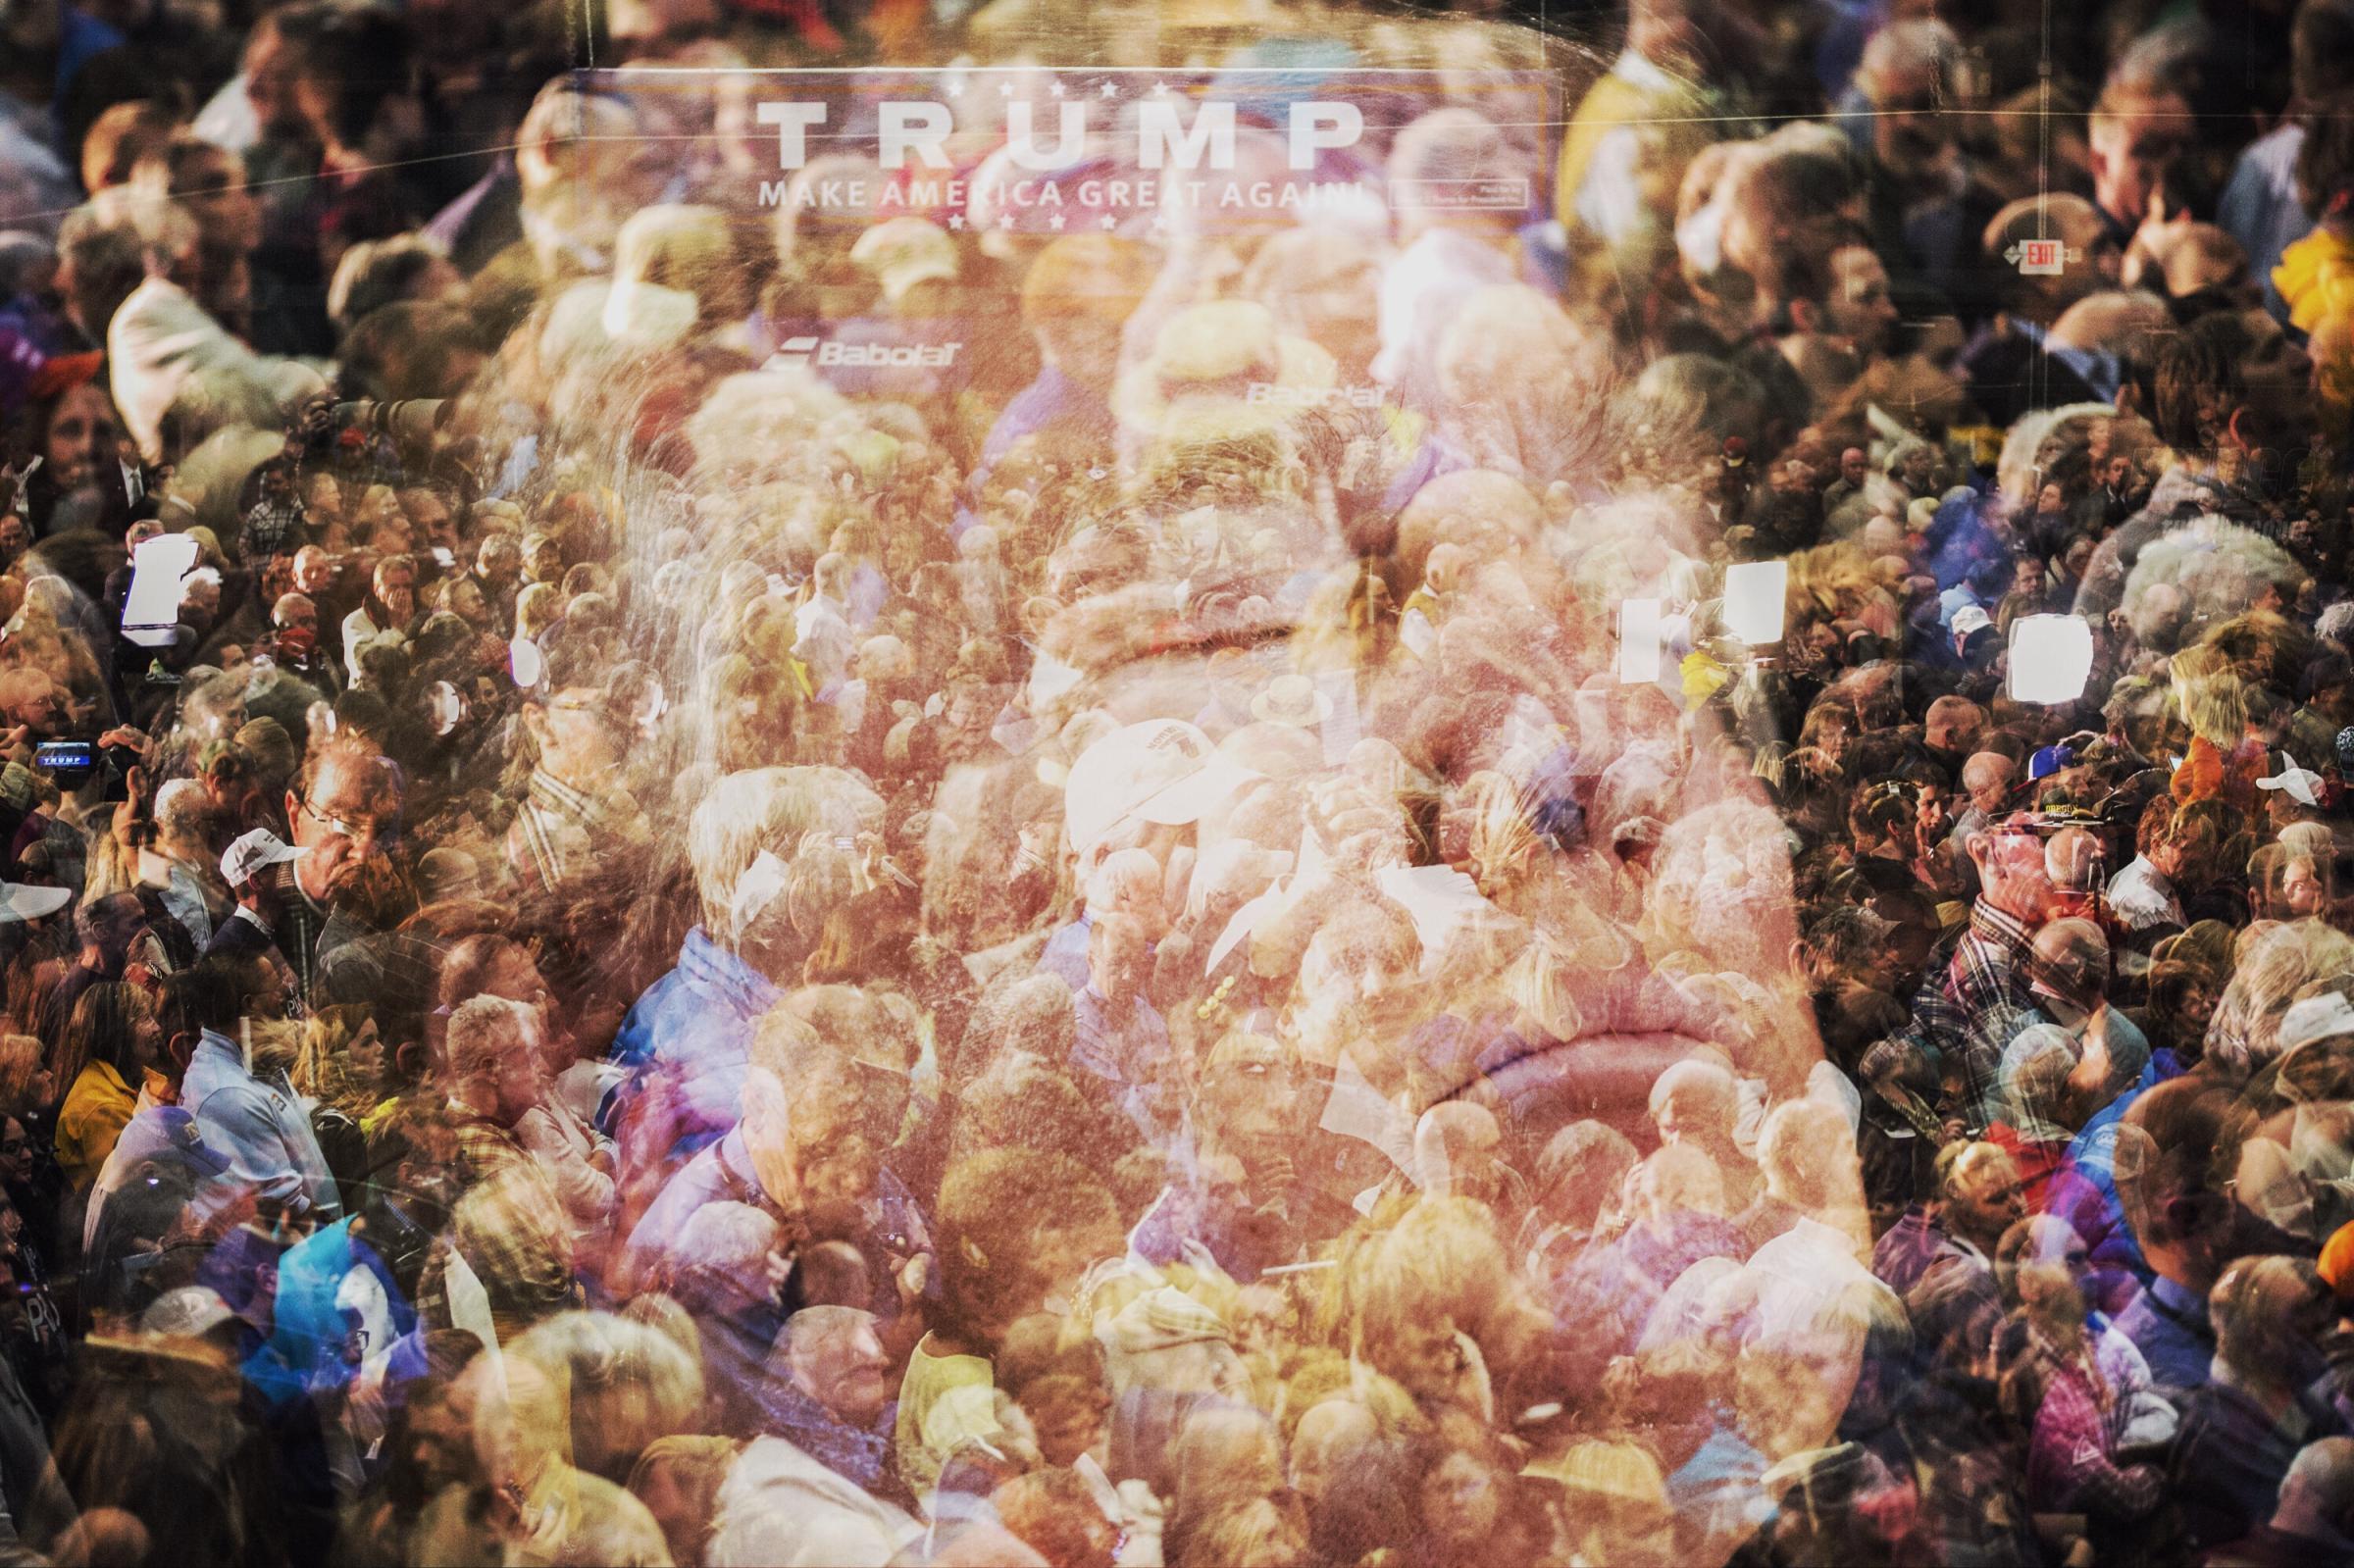 In this double exposure, Republican presidential candidate Donald Trump speaks to a crowd of supporters at a campaign rally in Milford, N.H. on Feb. 2, 2016.